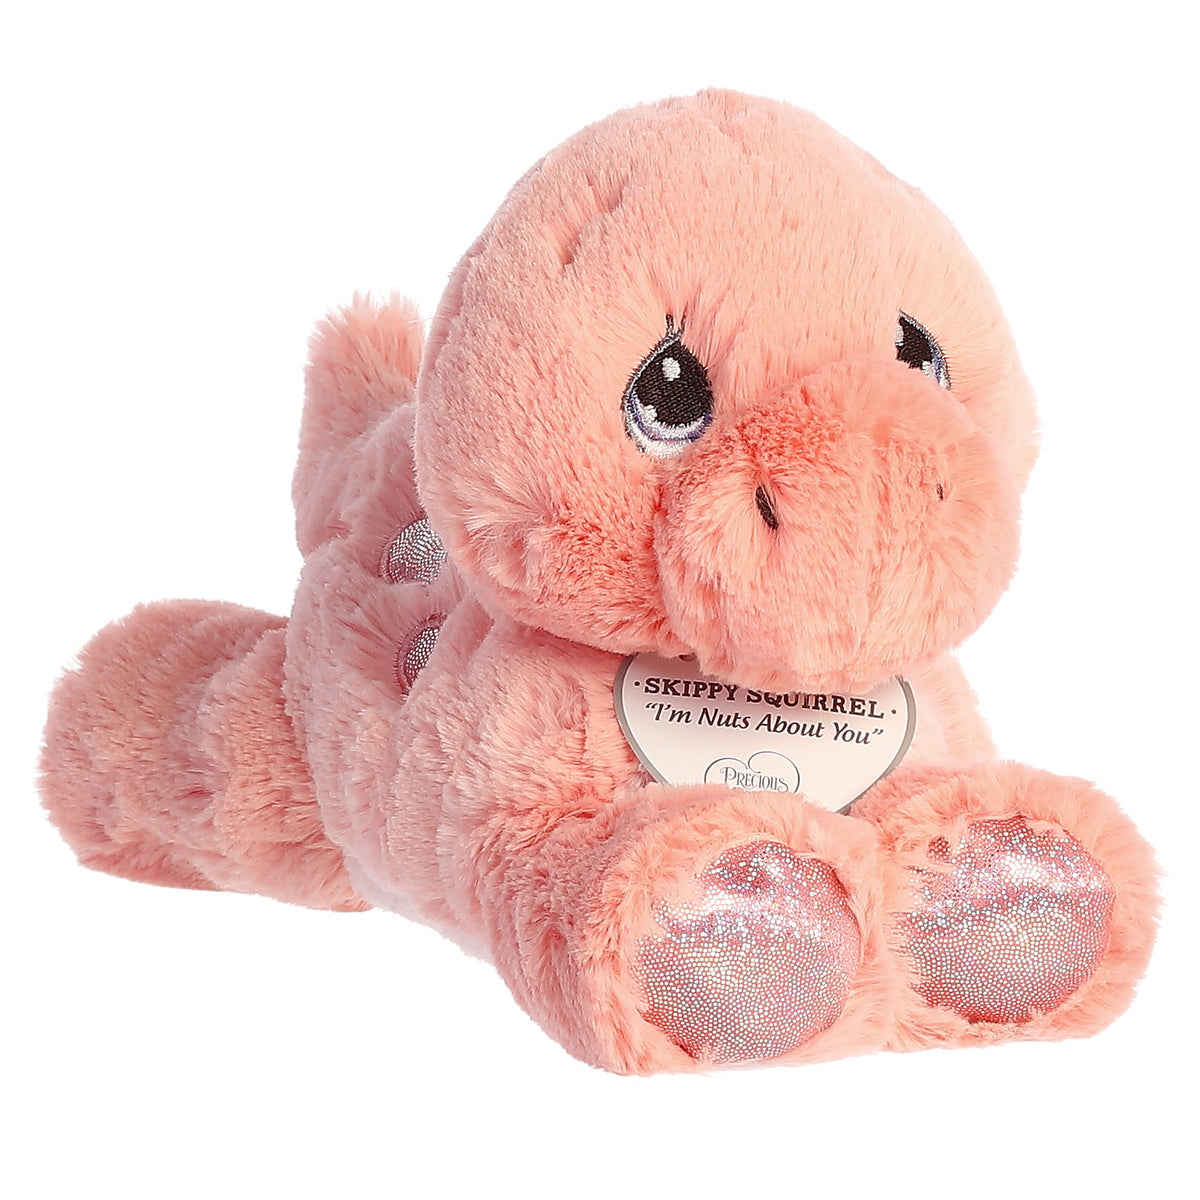 A laying down pink brontosaurus dino plush with tear-drop eyes and an inspirational tag around its neck.